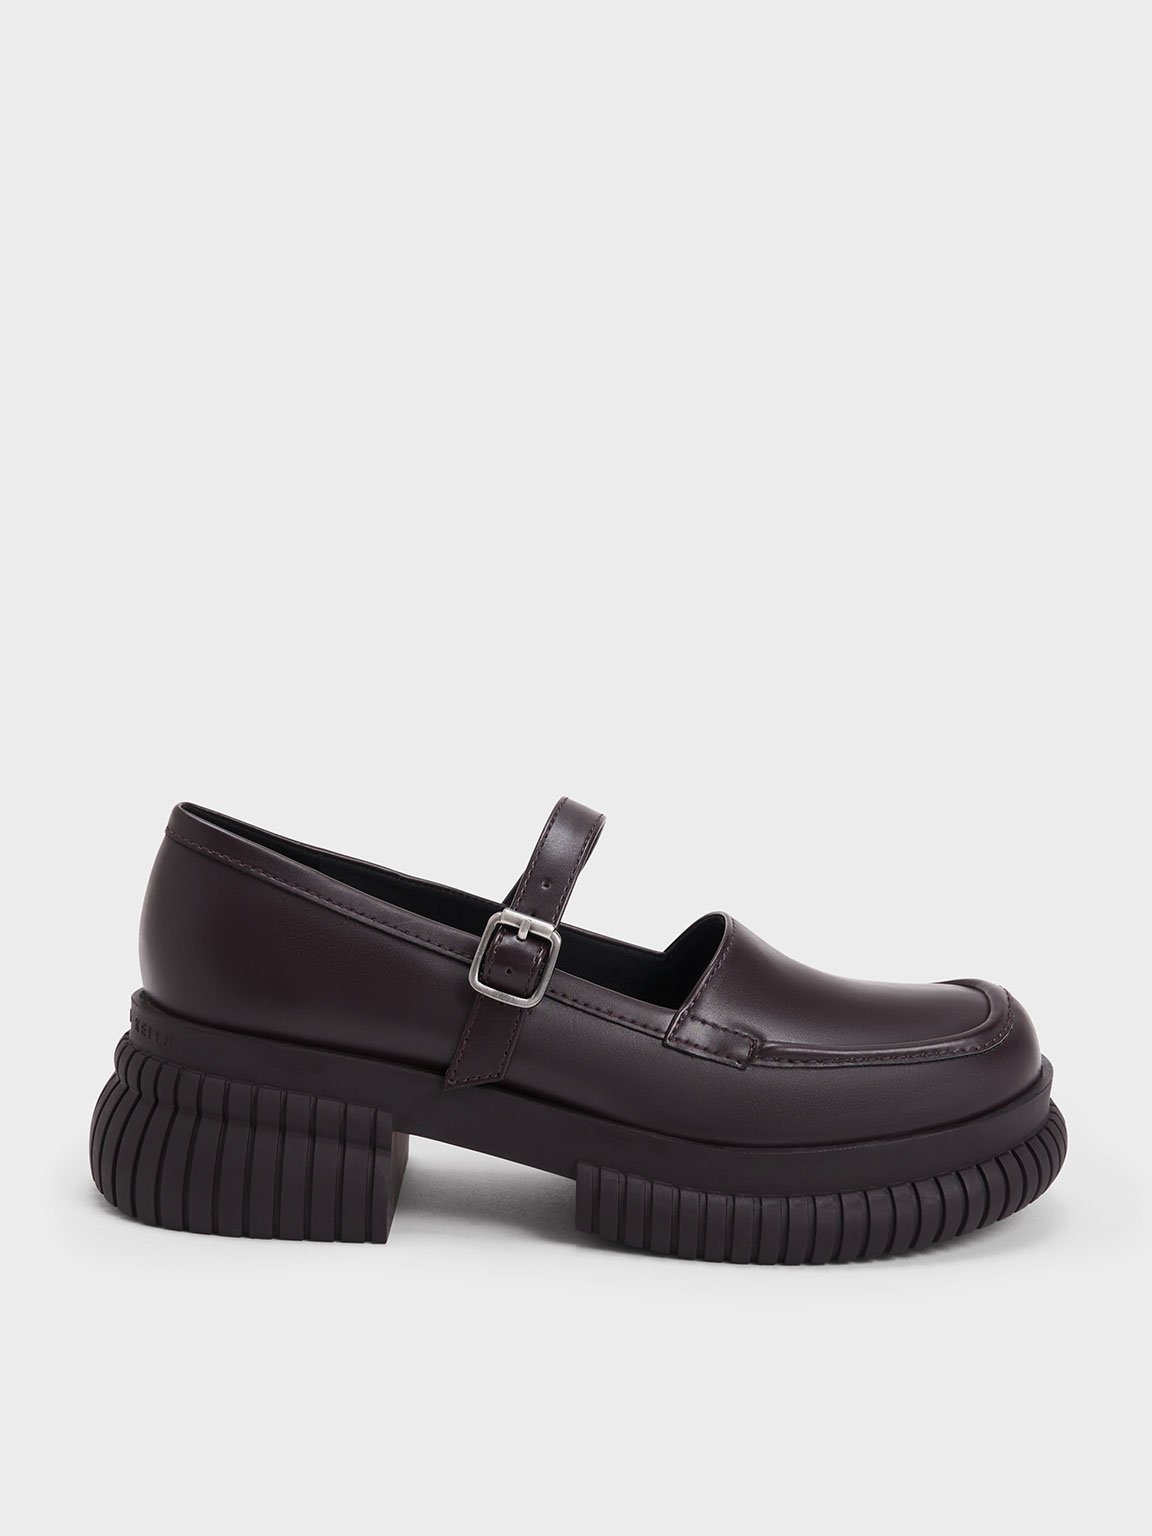 Charles & Keith Buckled Mary Jane Loafers In Dark Brown